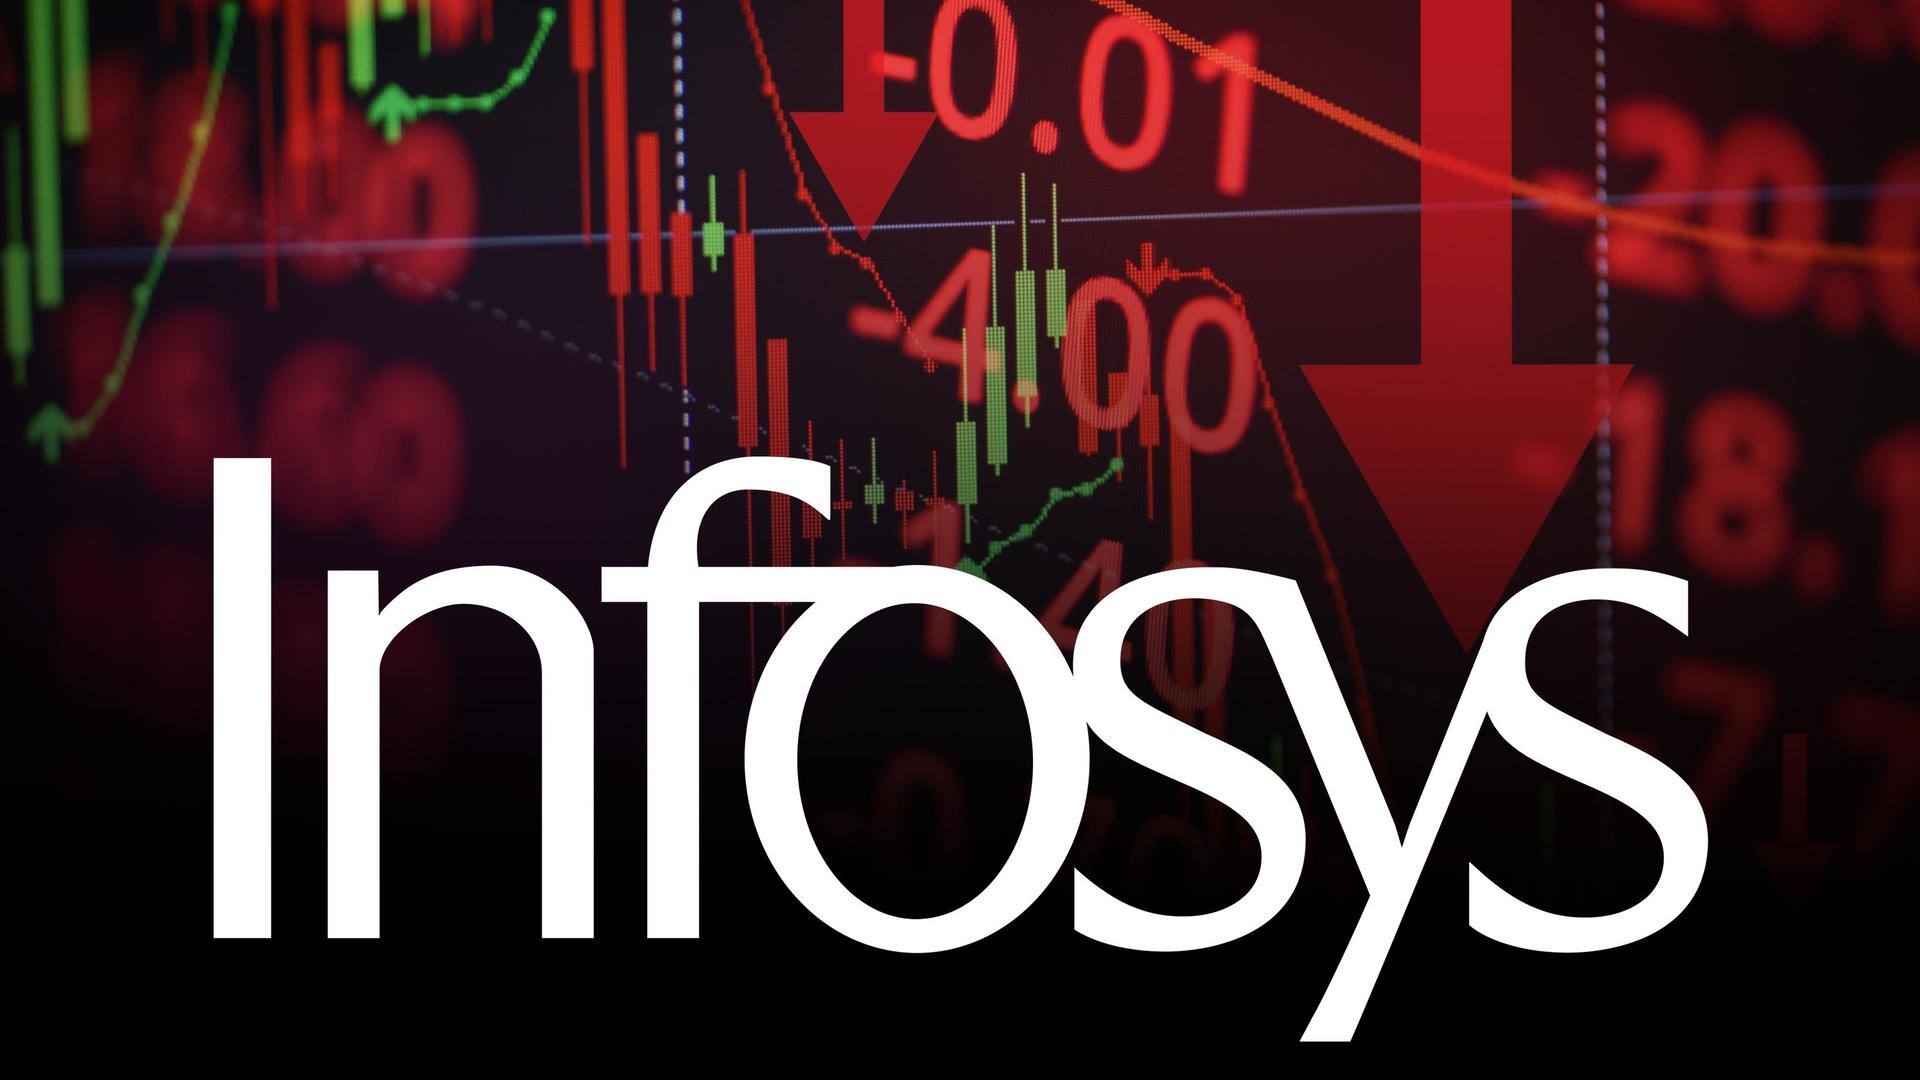 Infosys shares nosedive nearly 15%: Here's why